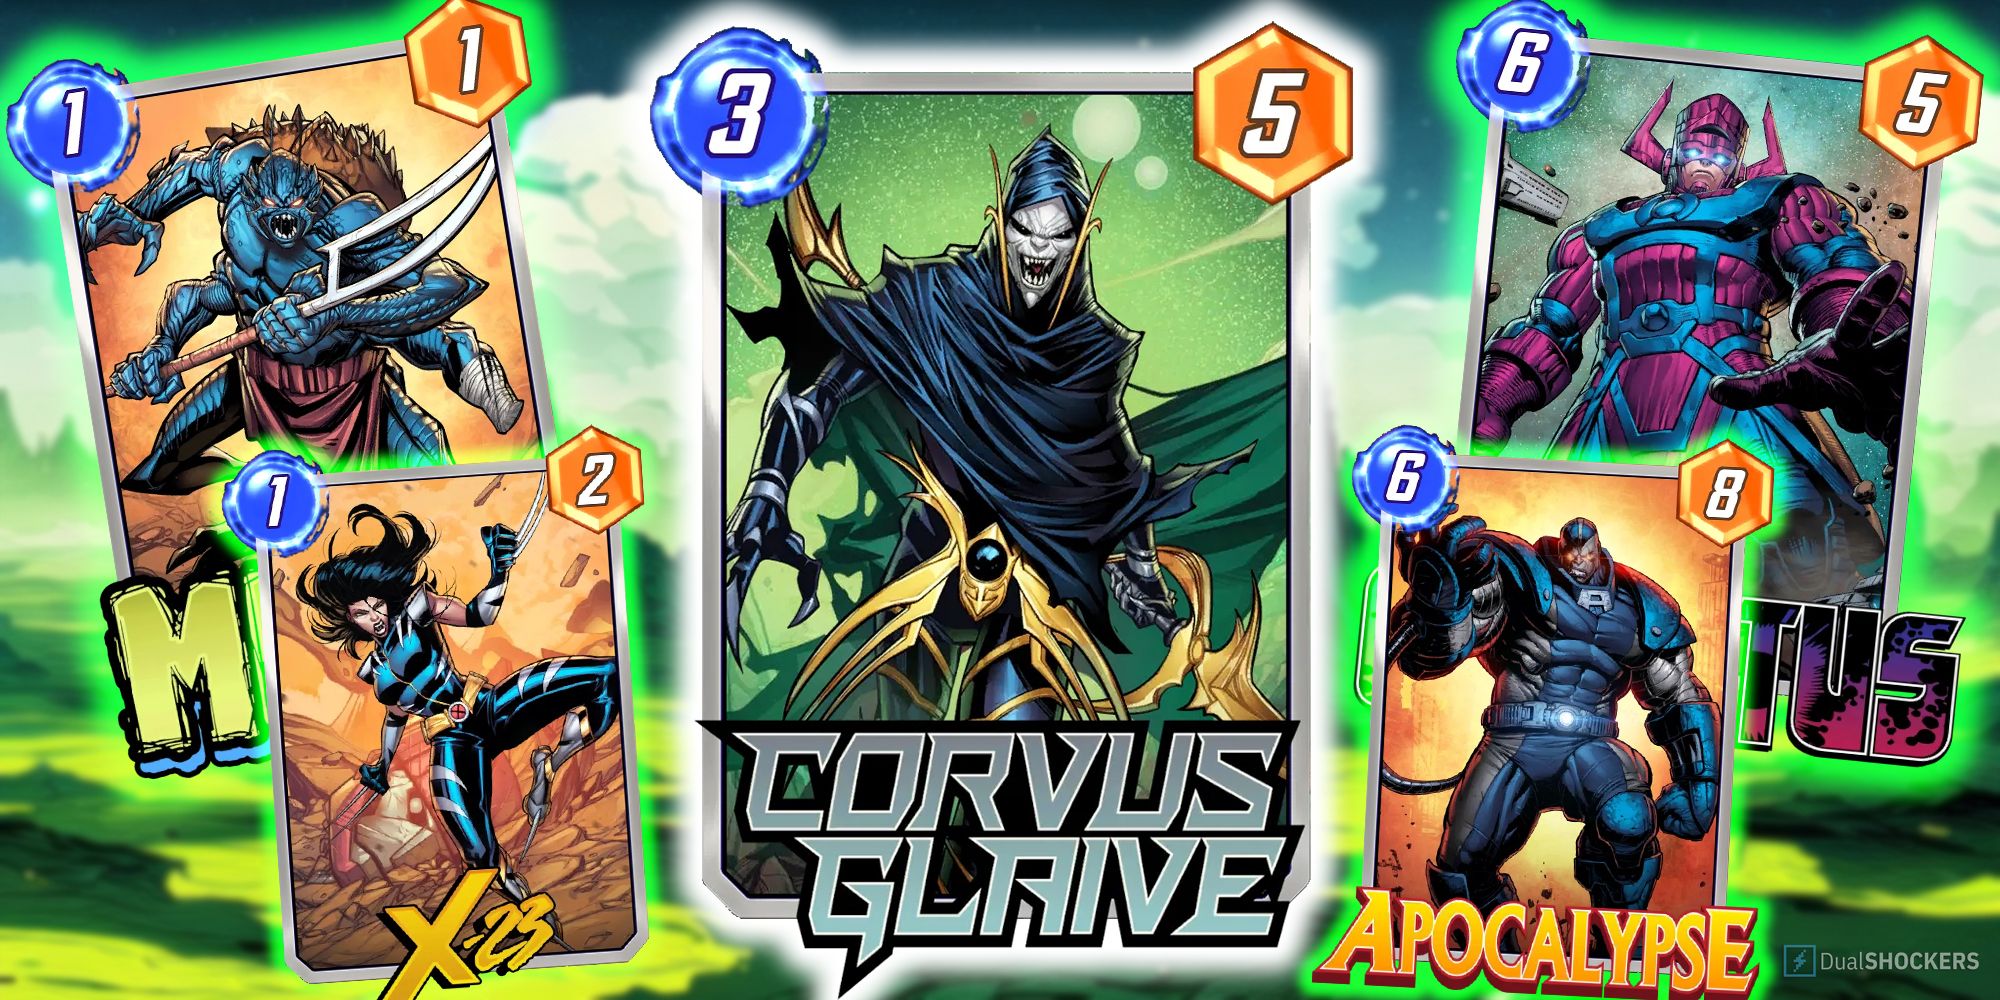 Marvel Snap's Corvus Glaive card surrounded by Miek, X-23, Galactus, and Apocalypse.